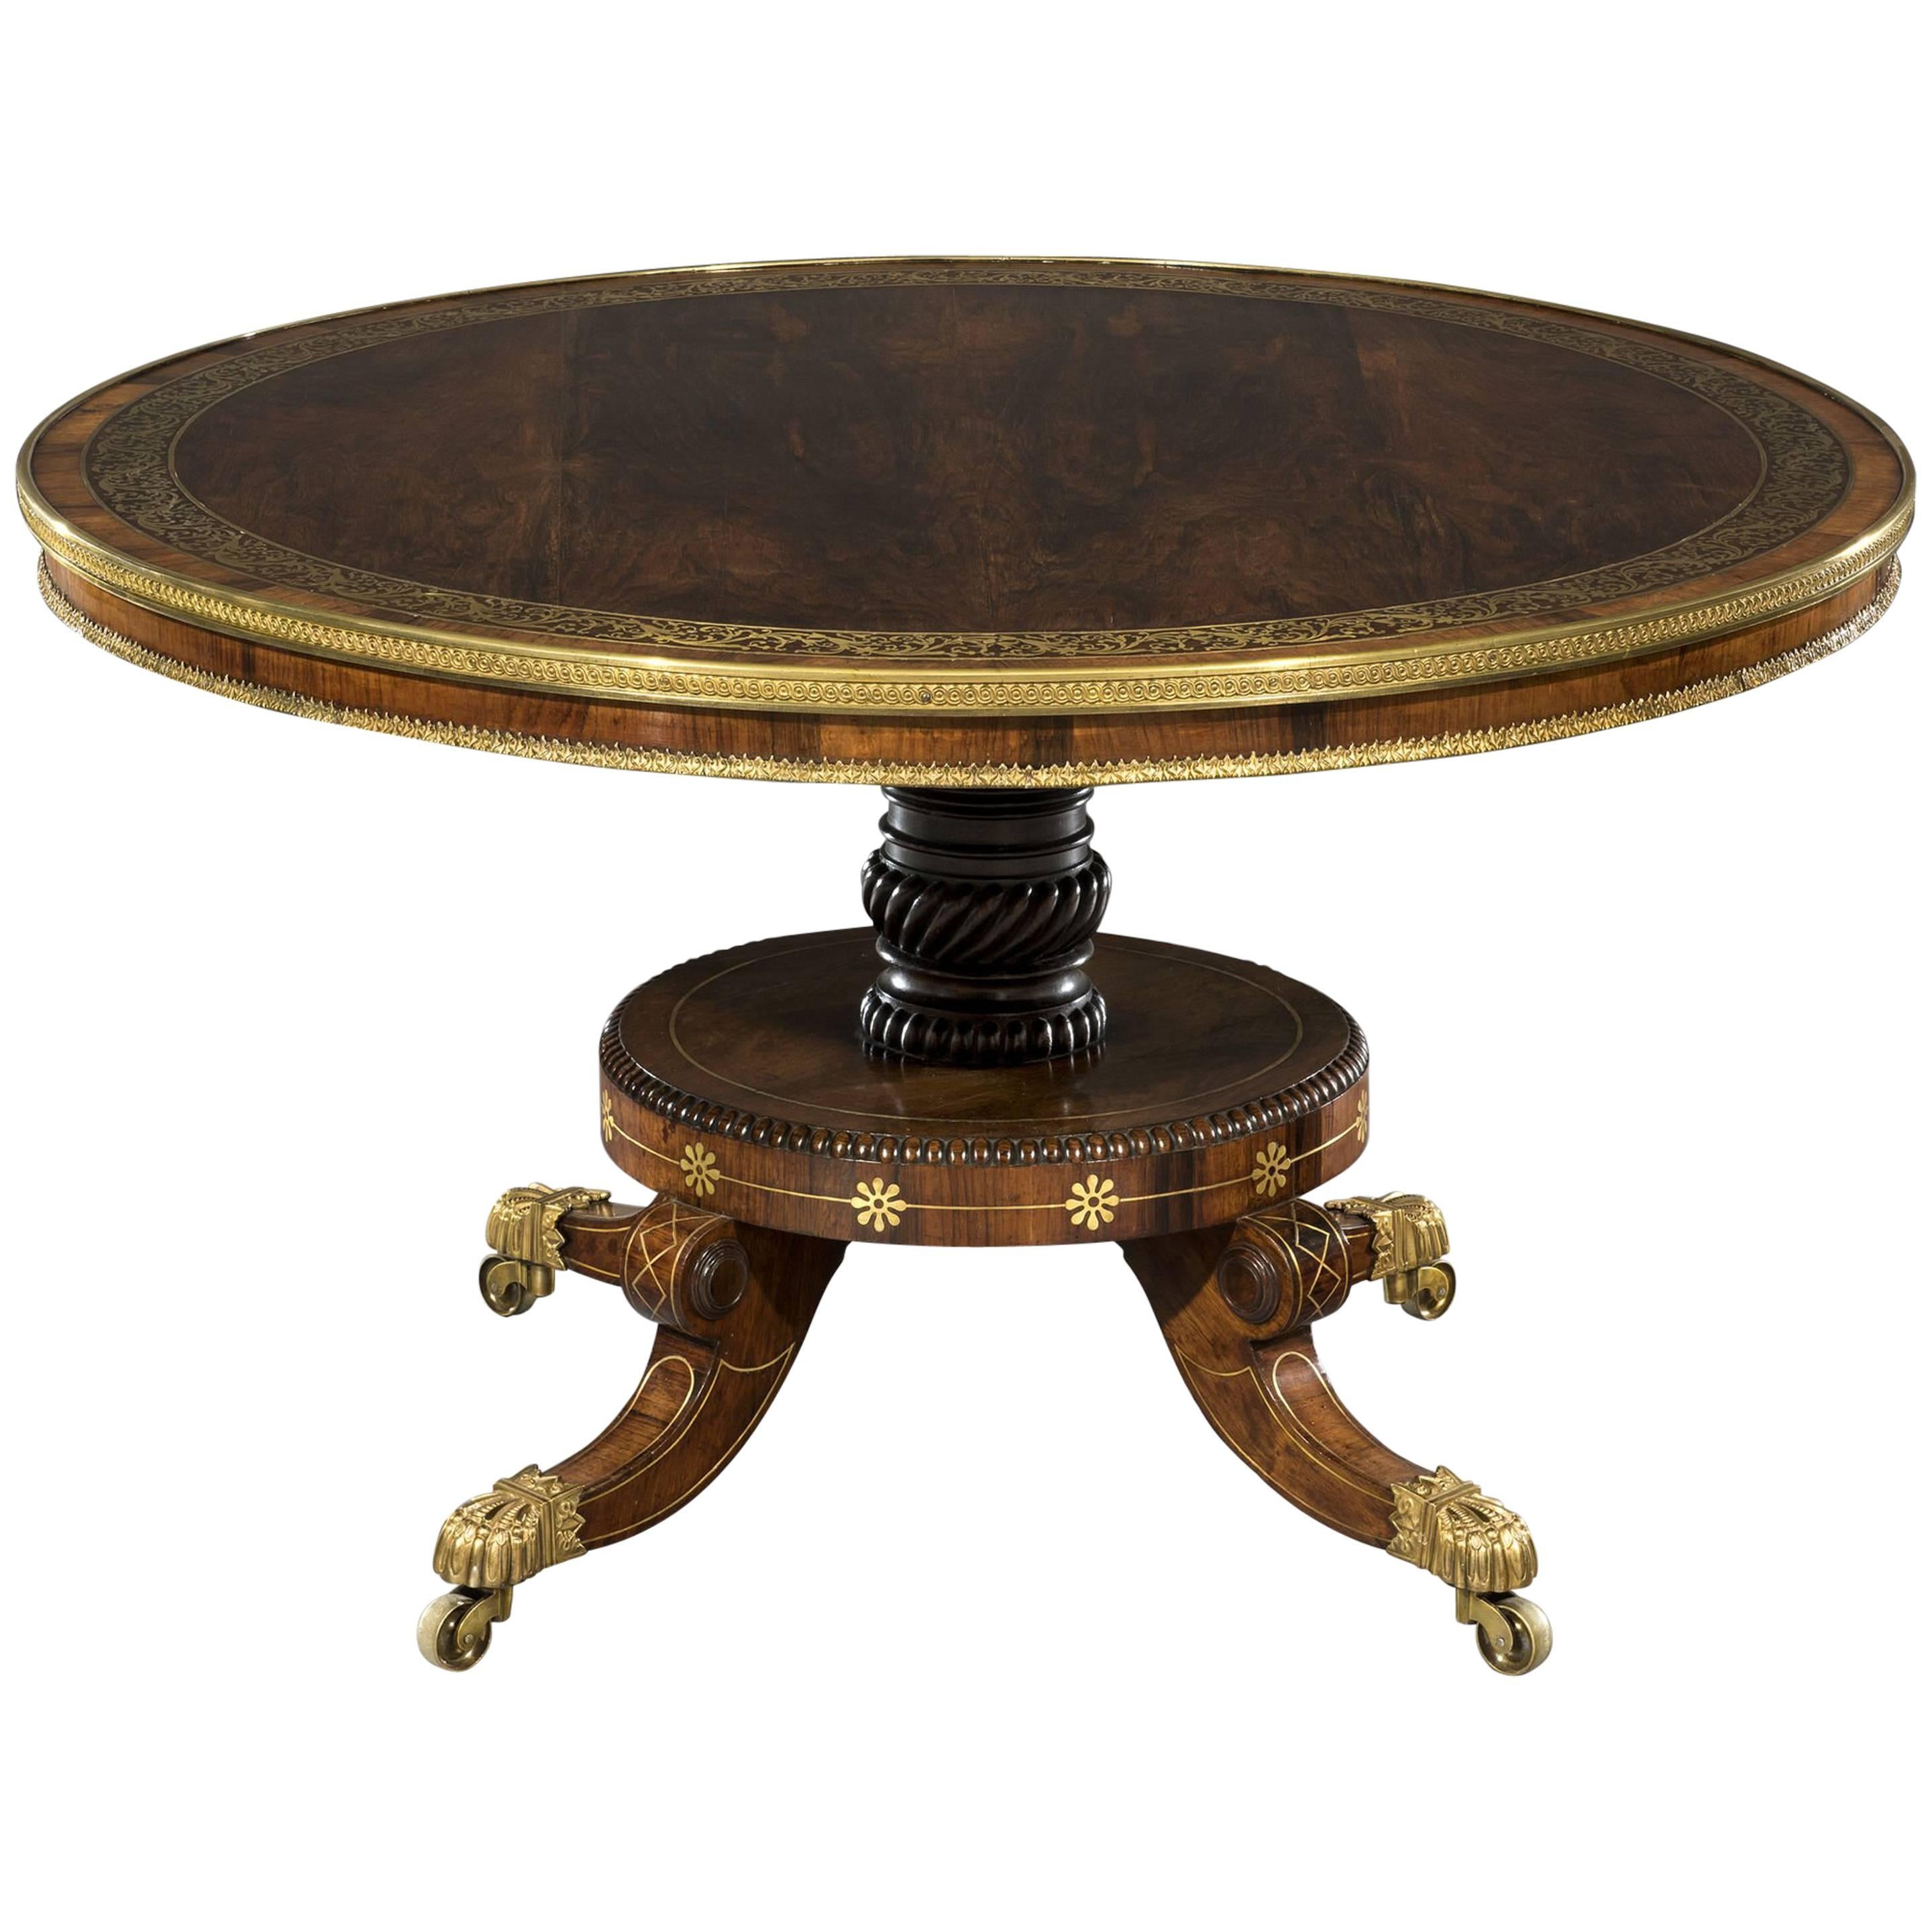 Magnificent Regency Period Rosewood Brass Inlaid and Ormolu Mounted Centre Table For Sale